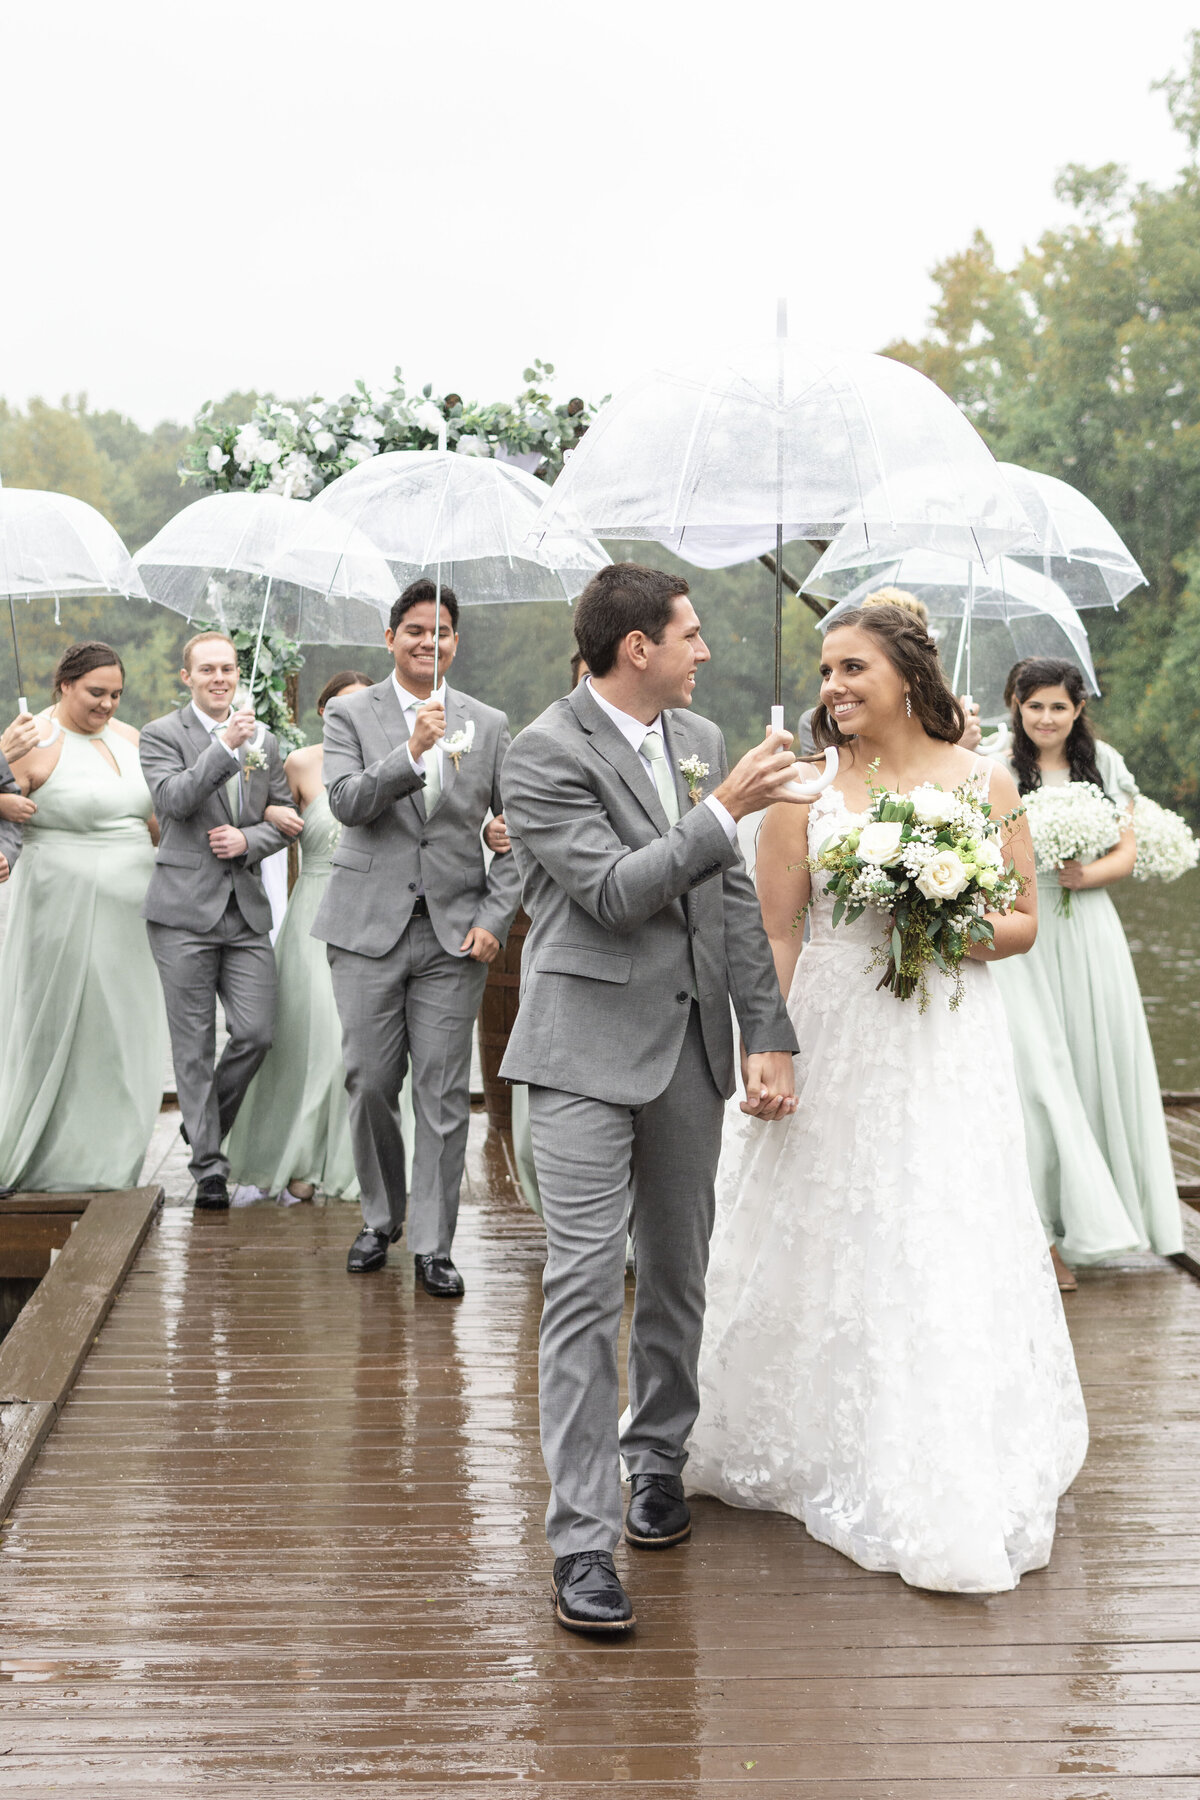 Bride & groom with their wedding party in the rain at Carolyn Baldwin Lake